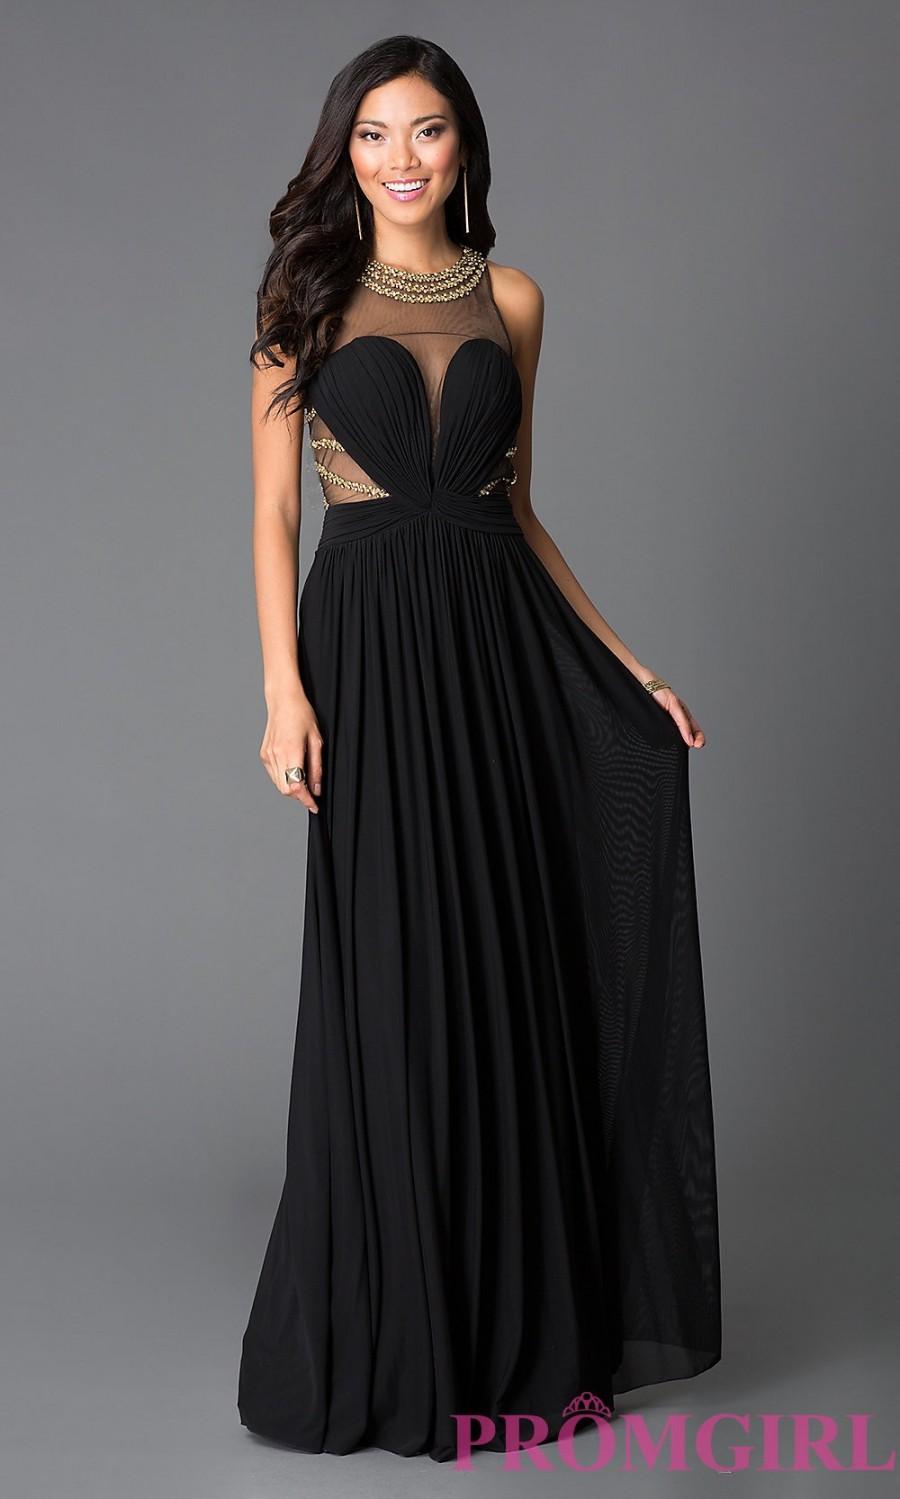 Wedding - Long Prom Dress from JVN by Jovani with Illusion Neckline - Brand Prom Dresses